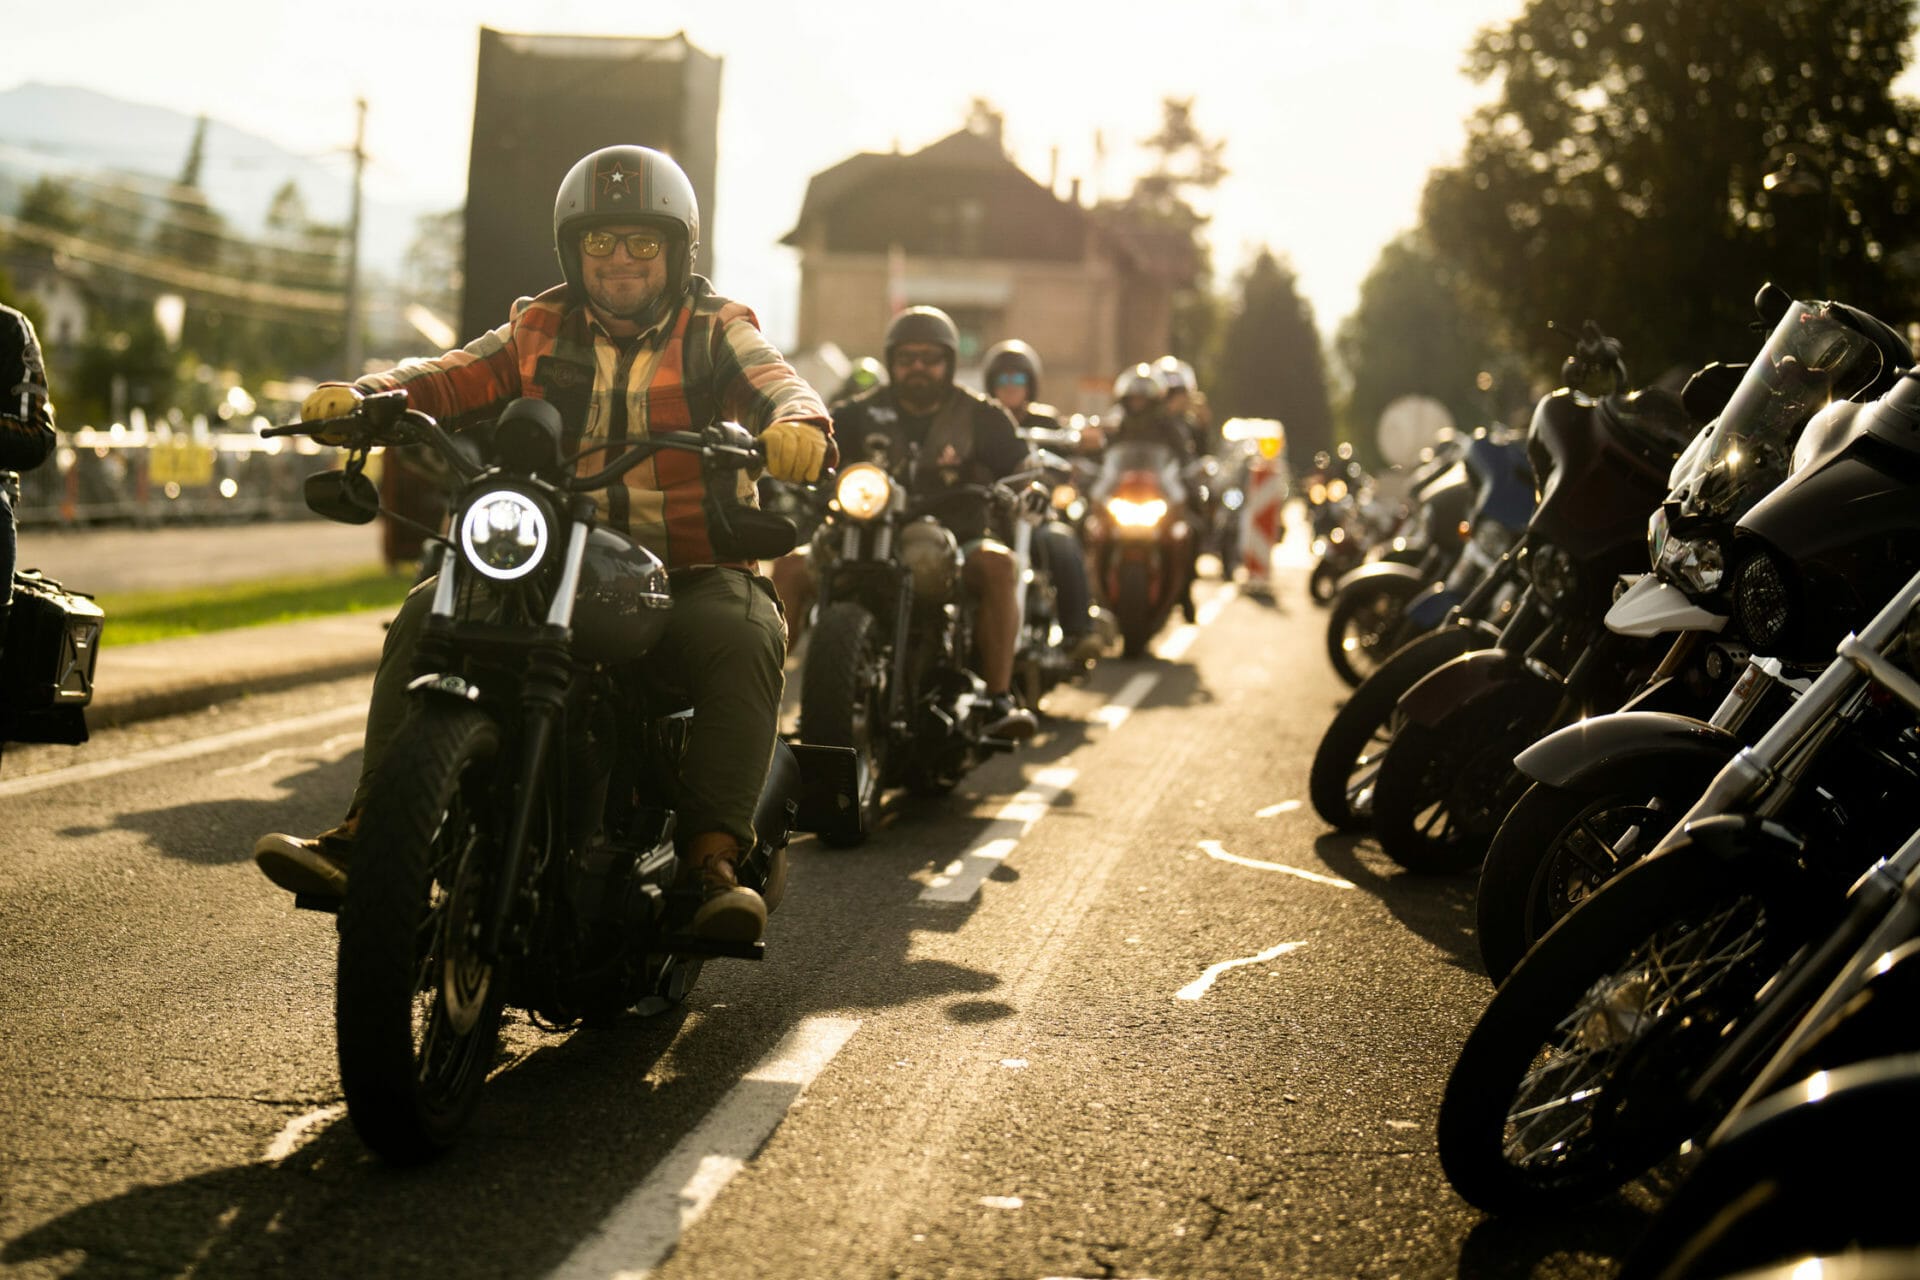 25 years of European Bike Week: A quarter of a century of motorized passion